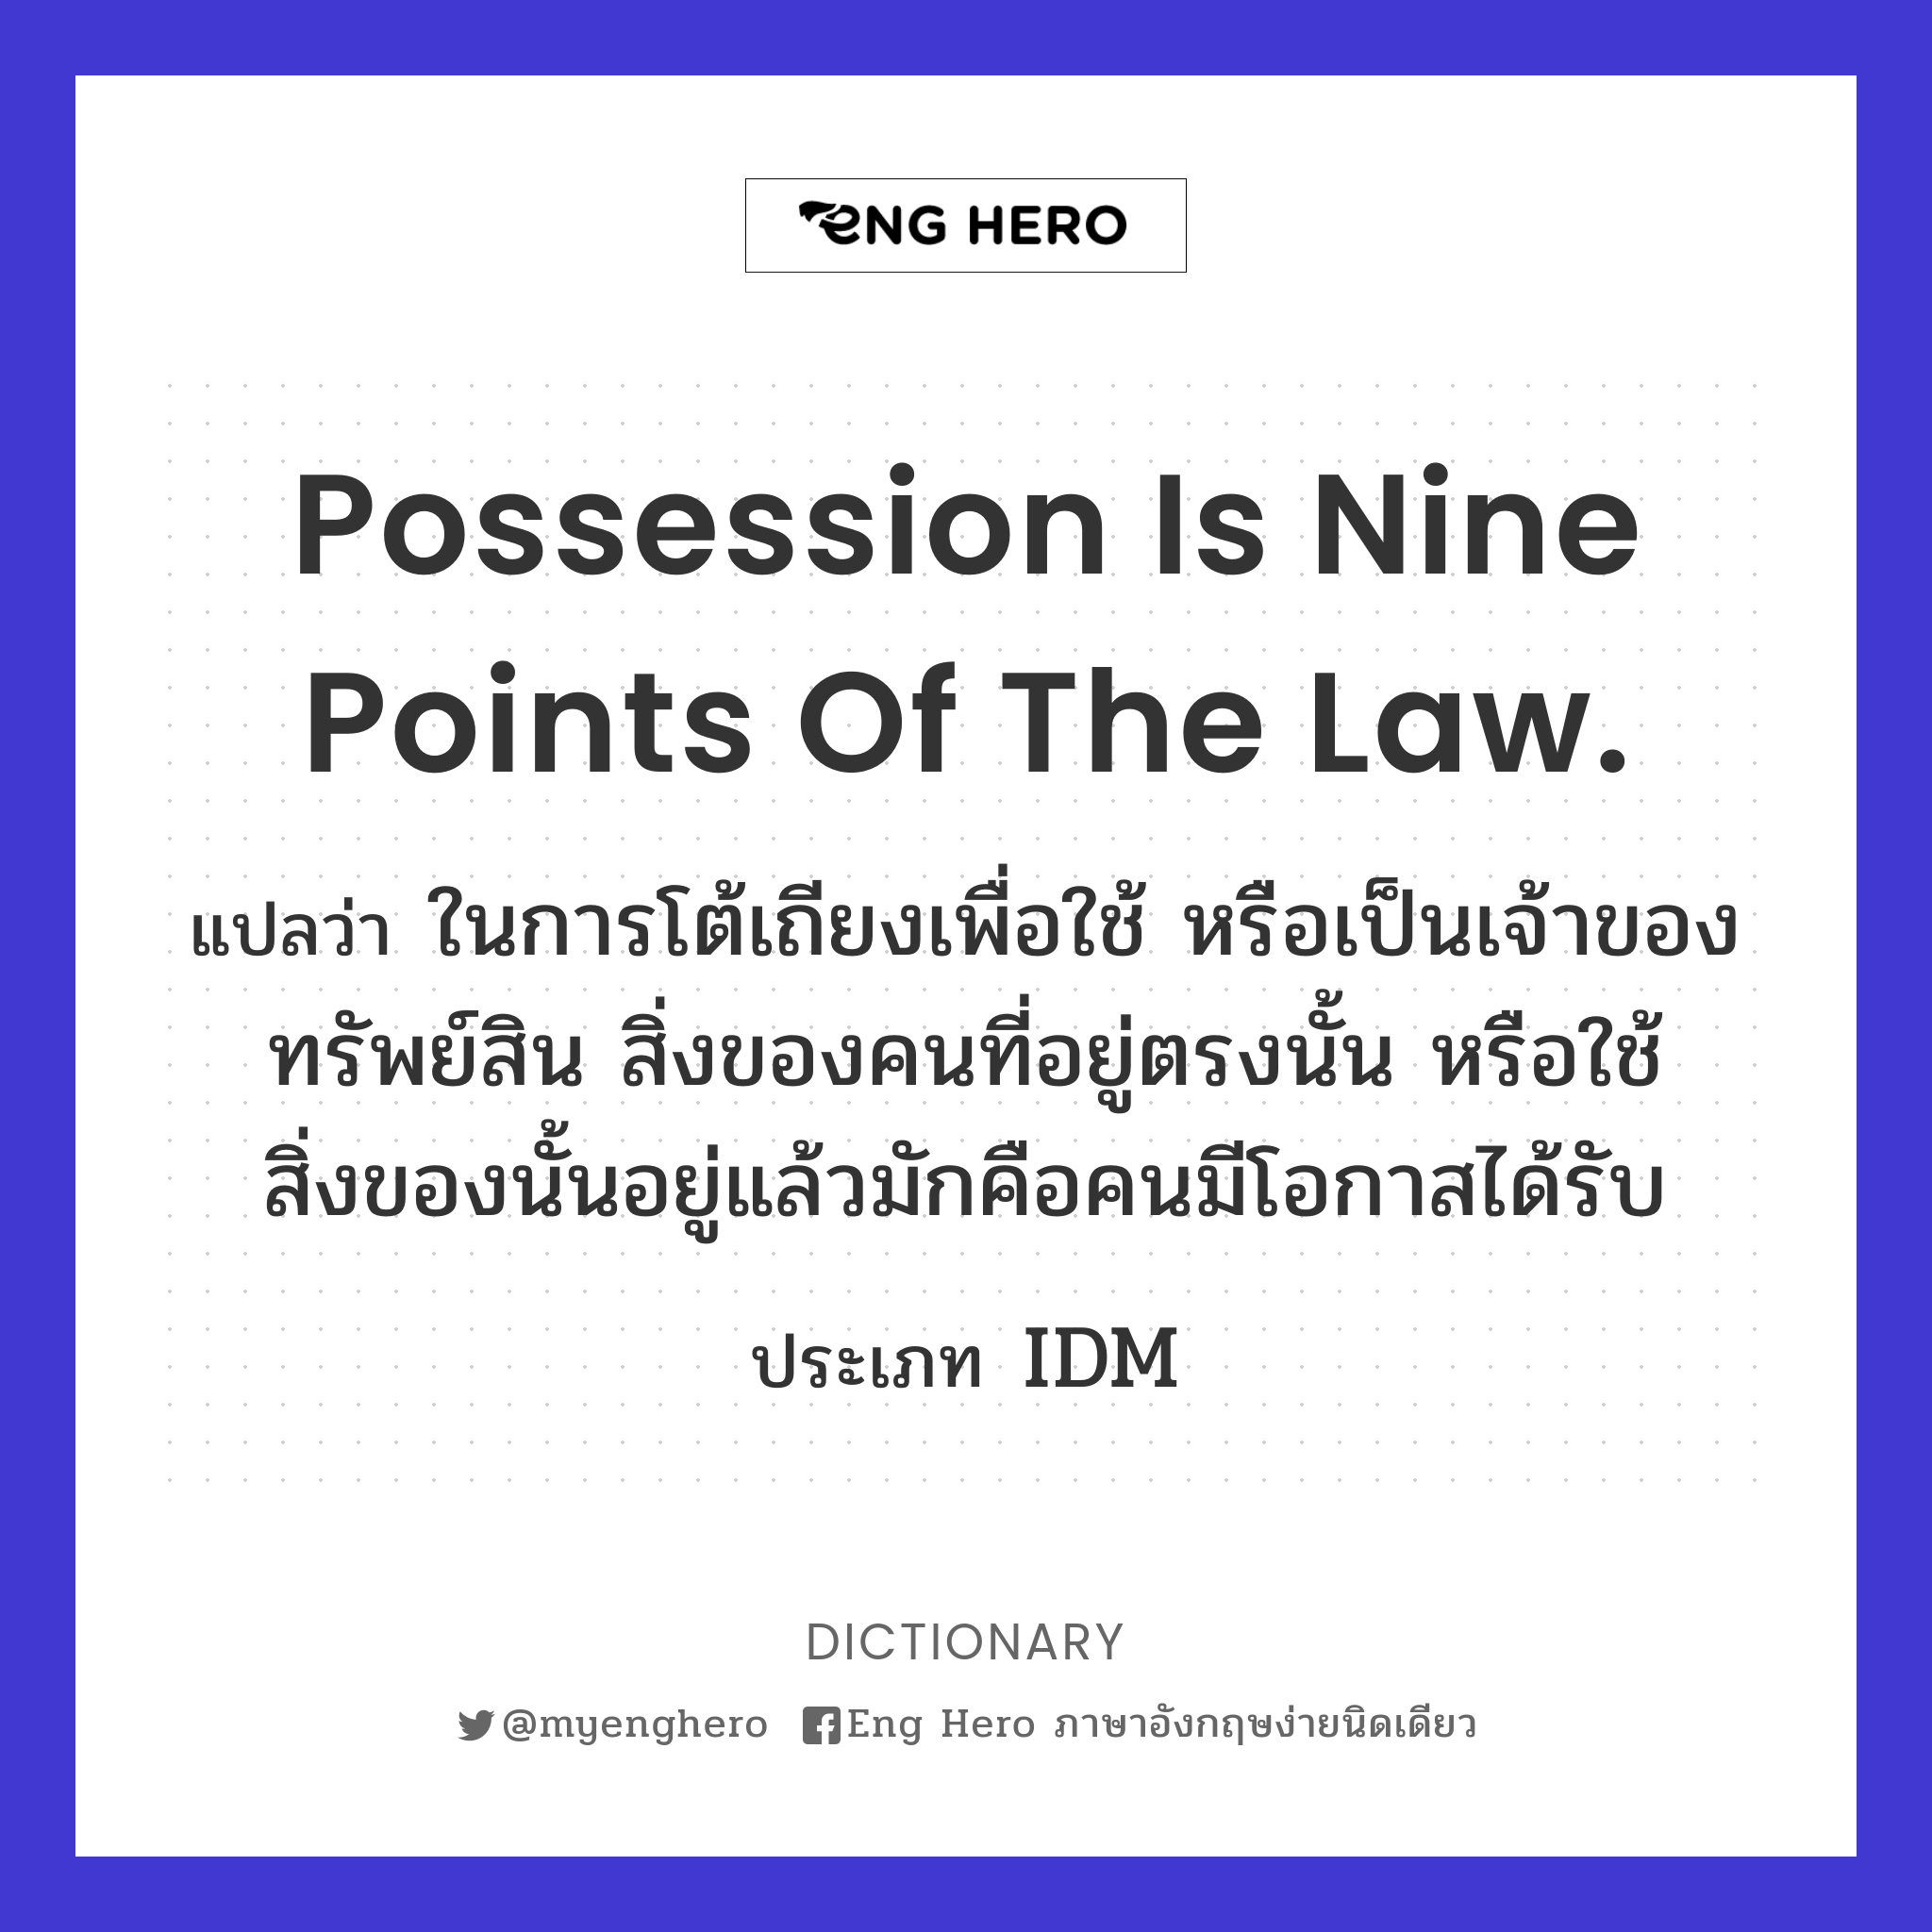 Possession is nine points of the law.